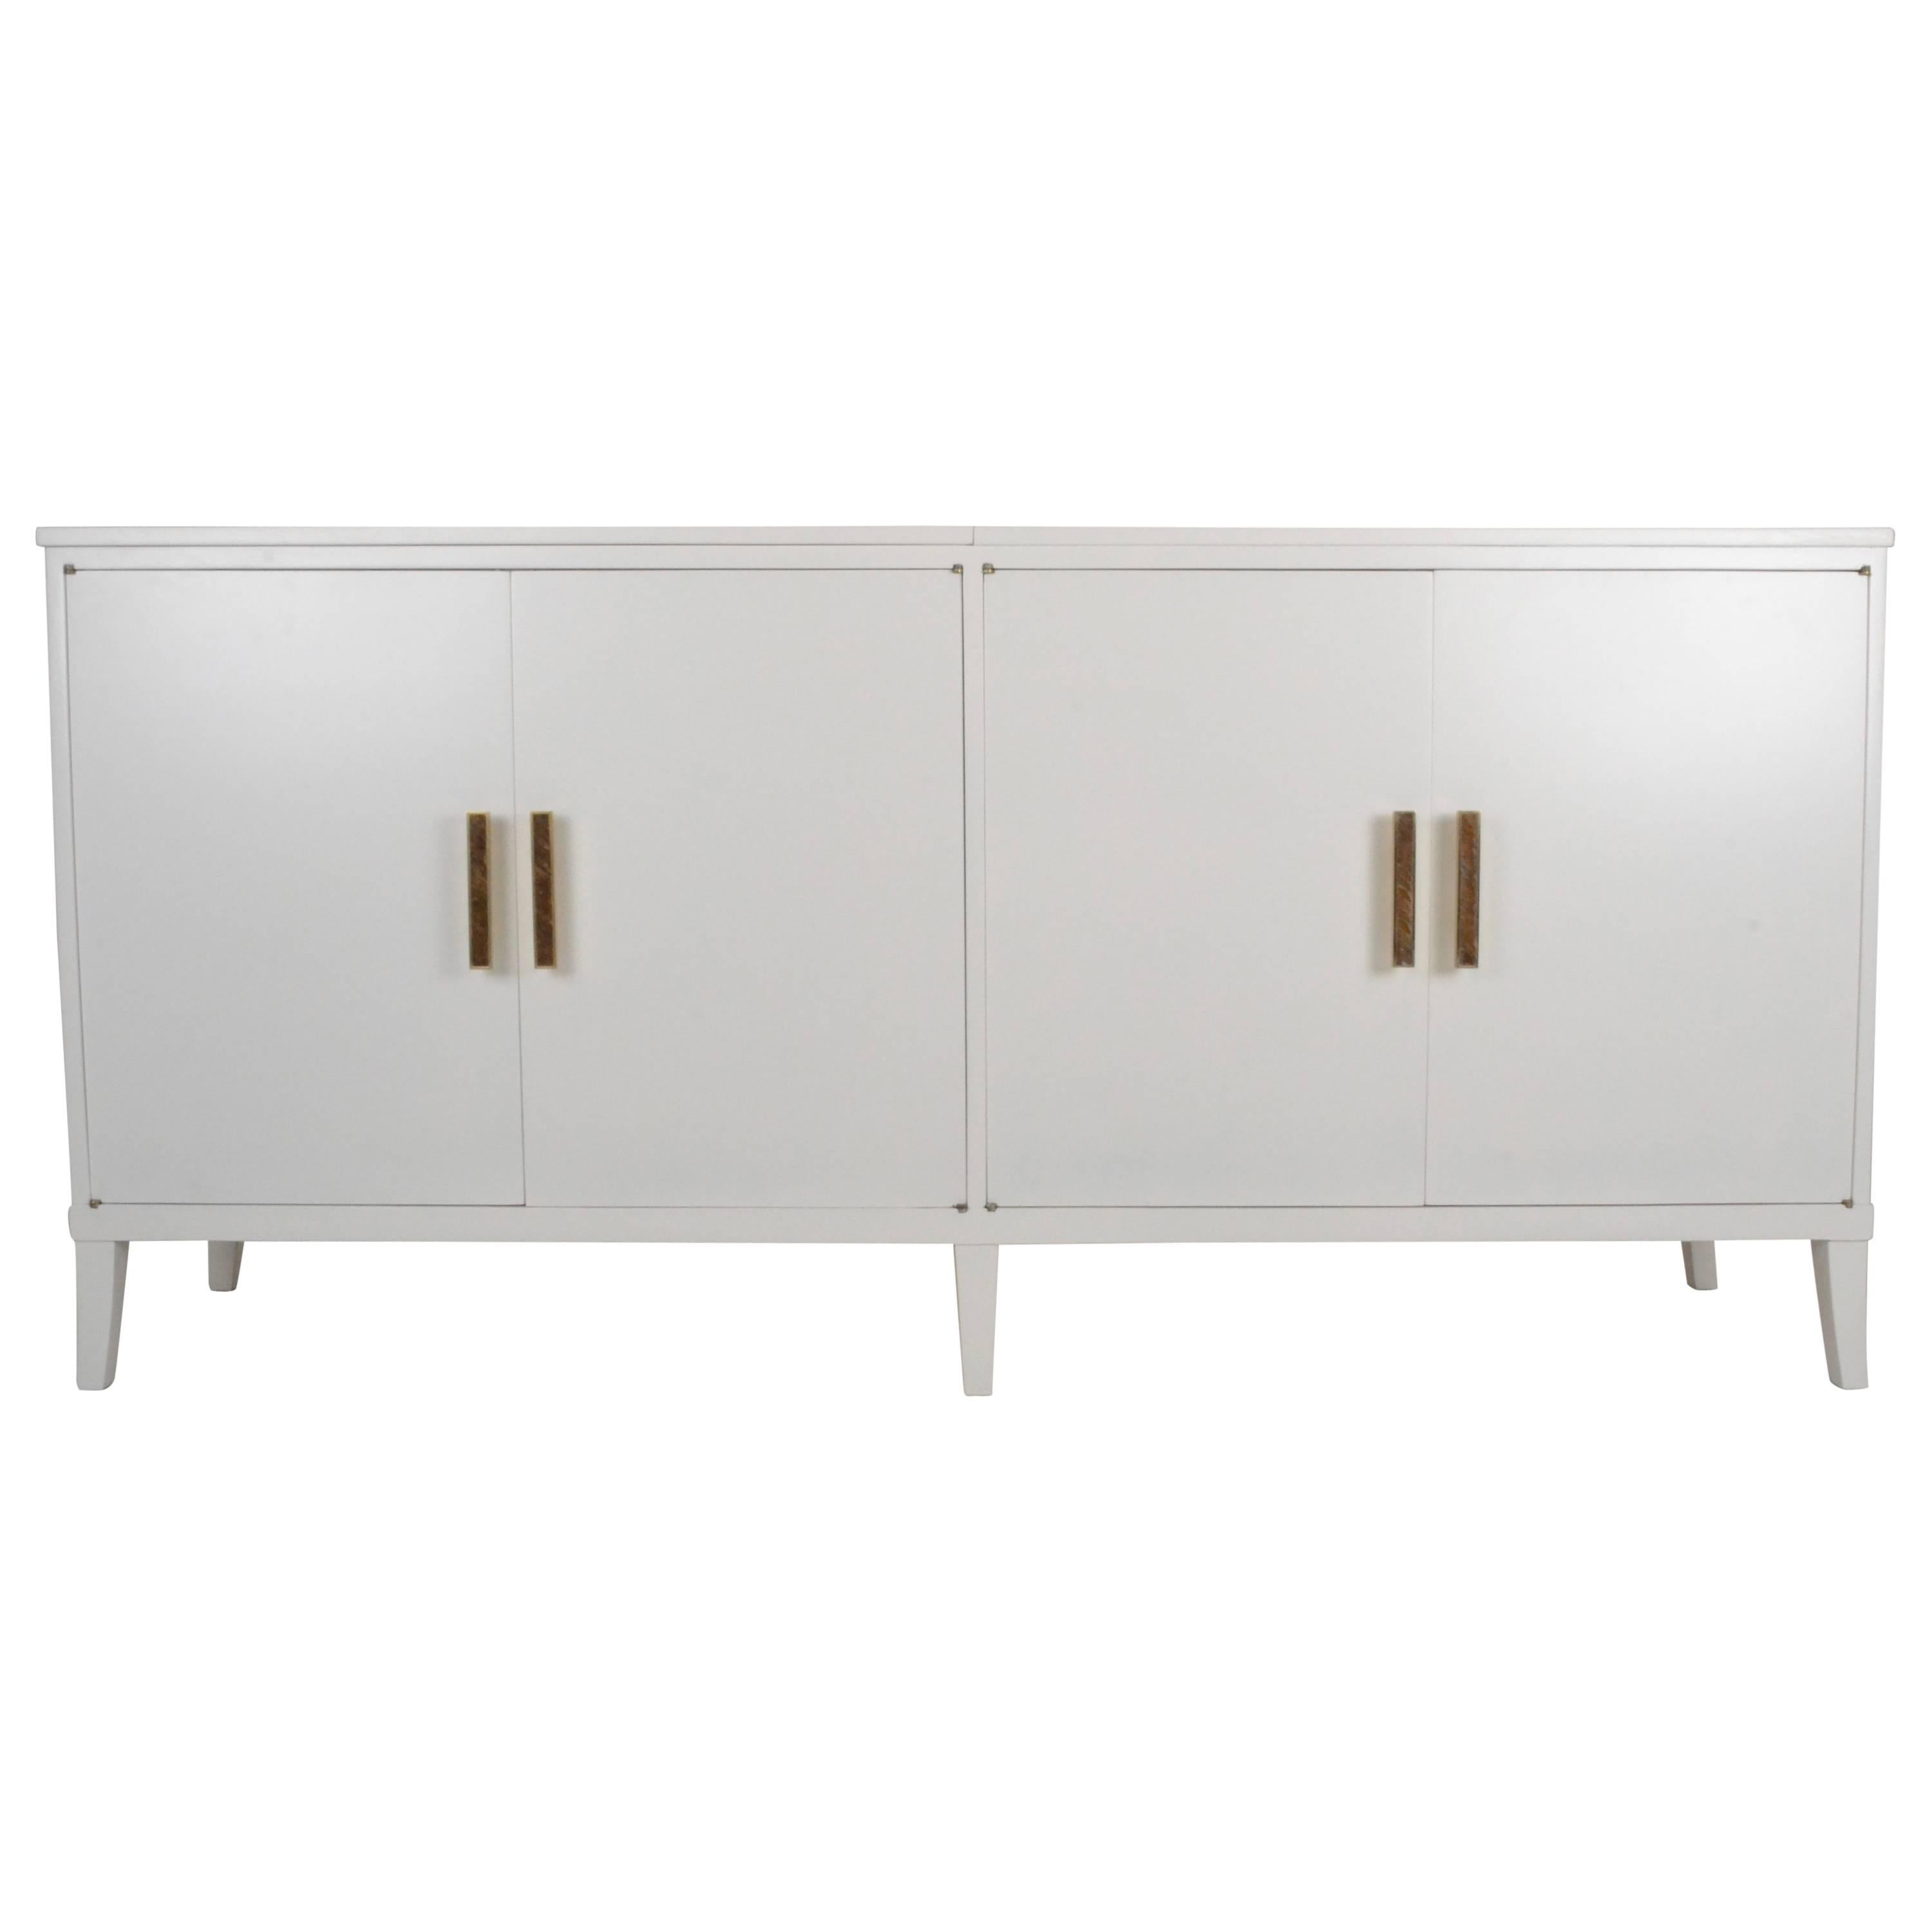 Sleek white cabinet with great lines. Left top opens to a hidden bar with bottle well and interior light. Right cabinet features built in wine rack. Great shapely legs and, maybe best of all, wonderful brass and inlaid enamel handles. Newly